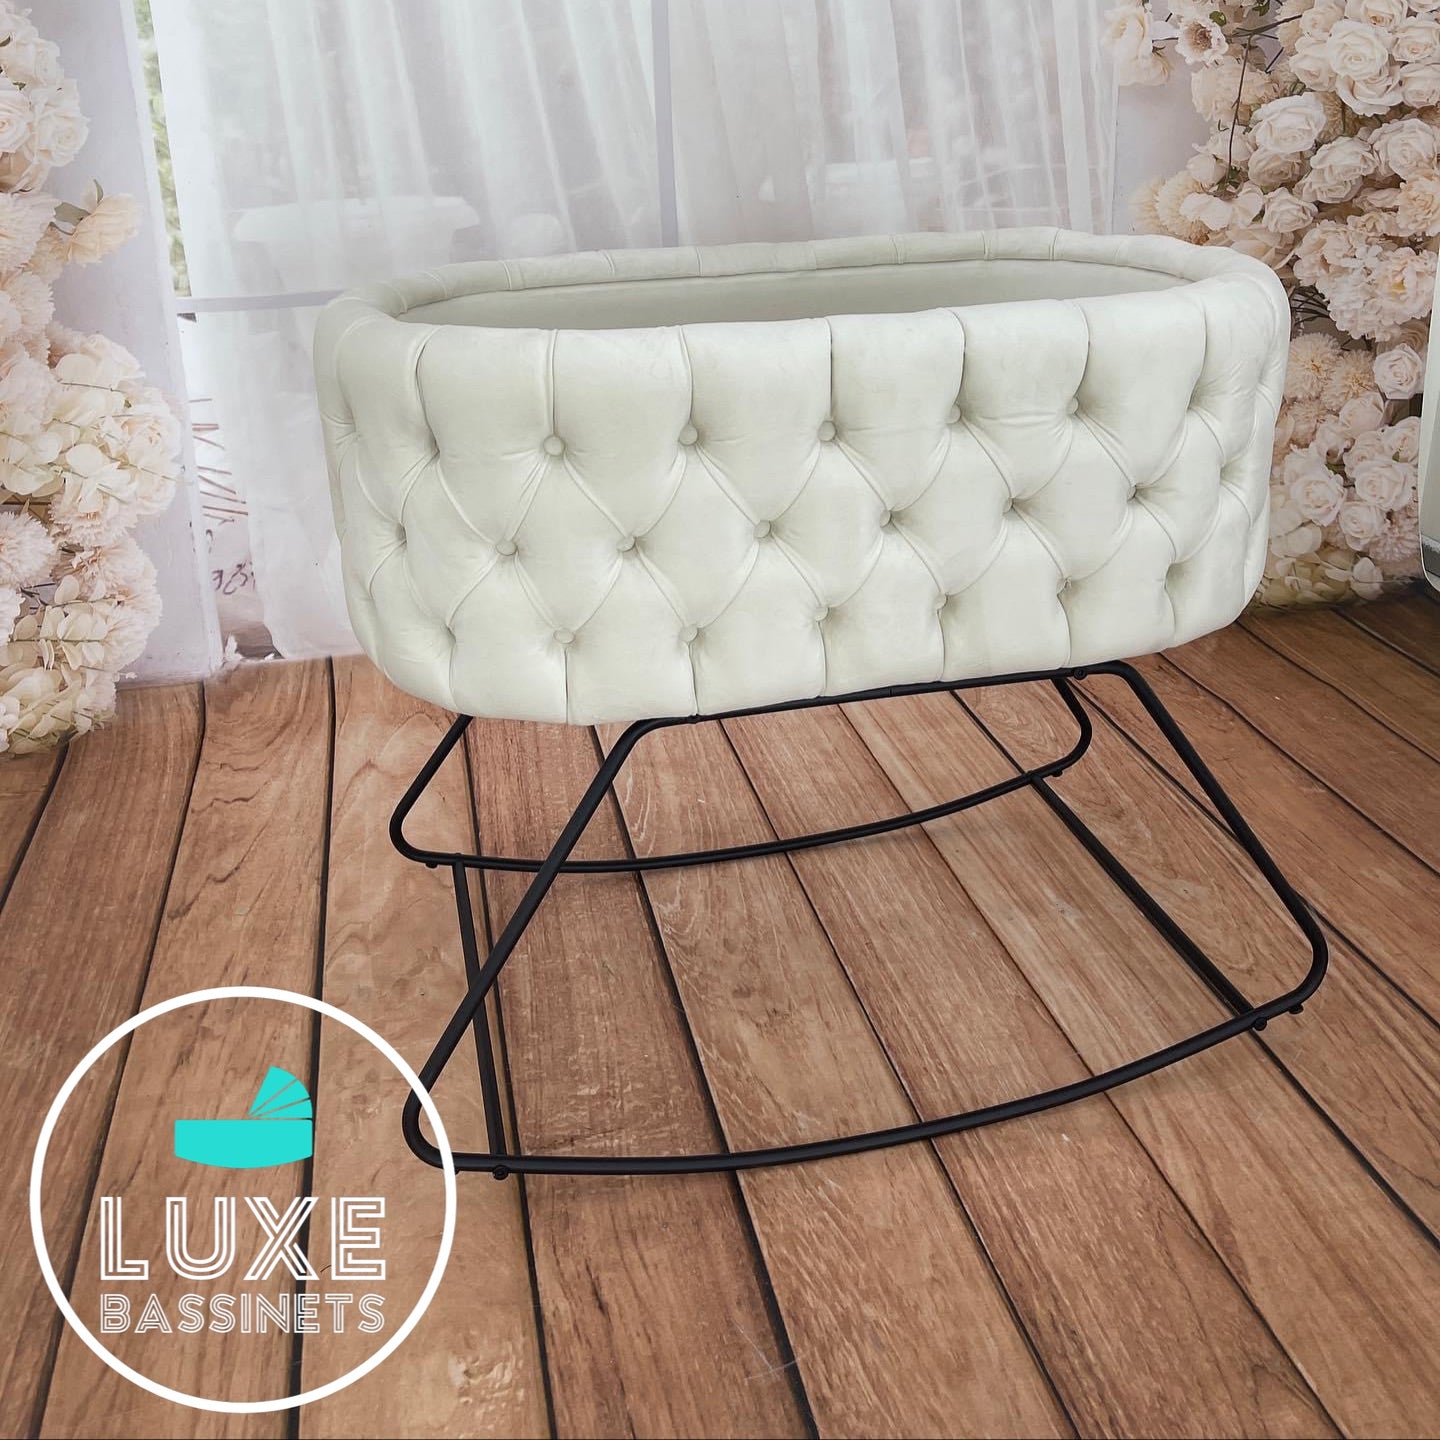 Oyster Bassinet with Rocking Legs